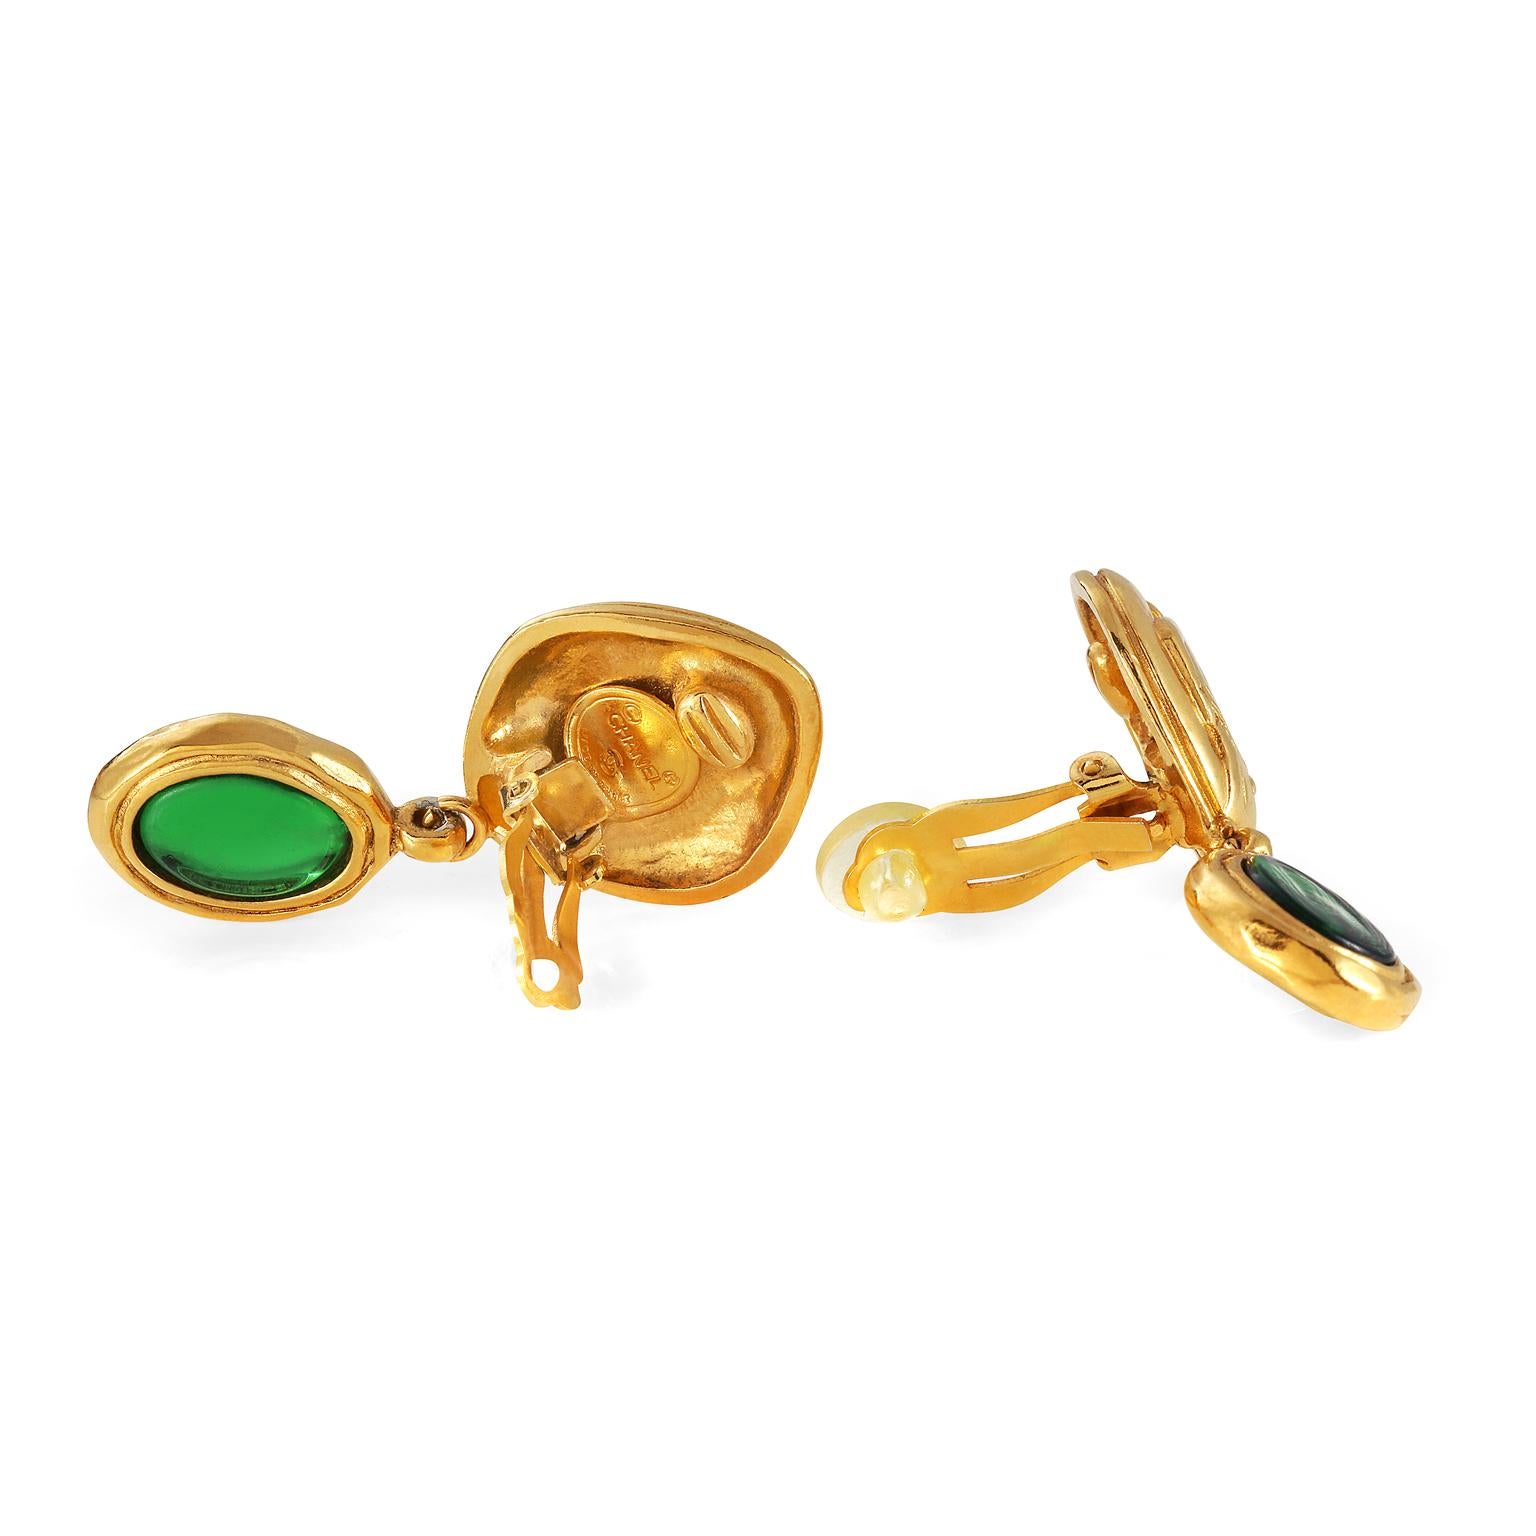 These authentic Chanel Green Gripoix Coco Earrings are in excellent vintage condition from the 1970’s.  Bright green Gripoix glass stones dangle from a Coco silhouette engraved in gold.  Clip on closure.  Pouch or box included.  Made in France,

